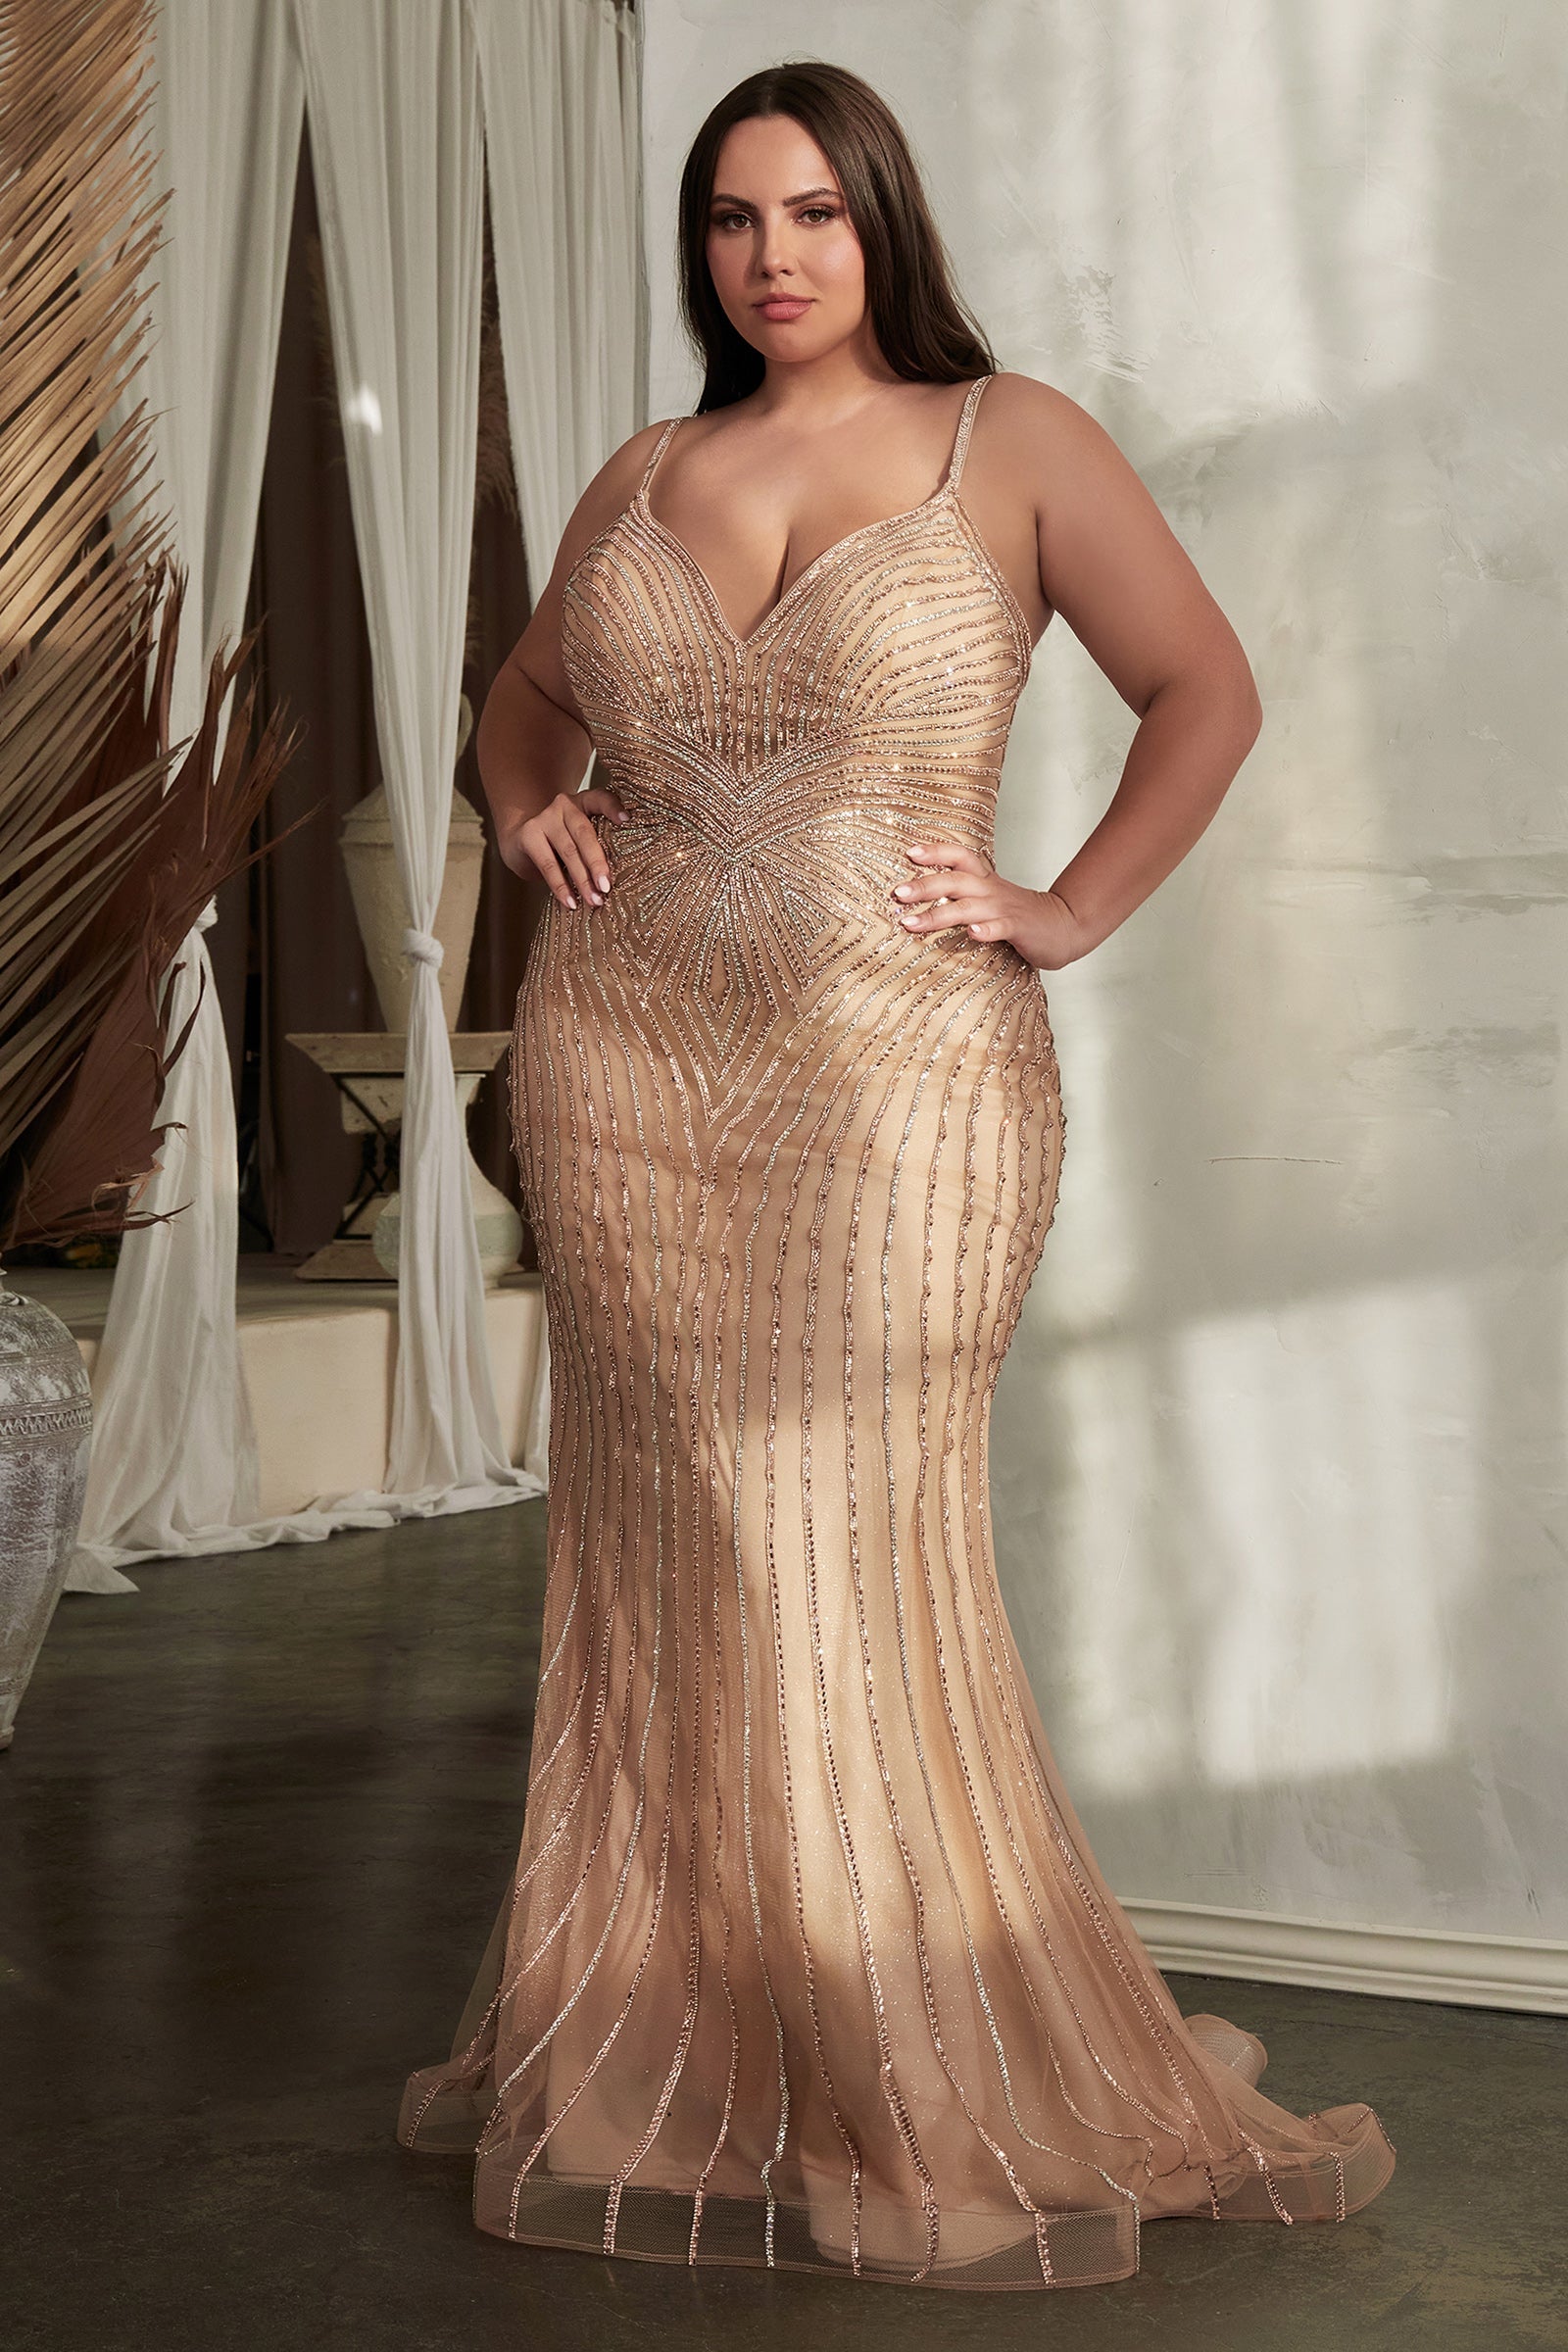 FEMME Curves ZENITH Plus Size Beaded Couture Prom & Formal Mermaid Dress